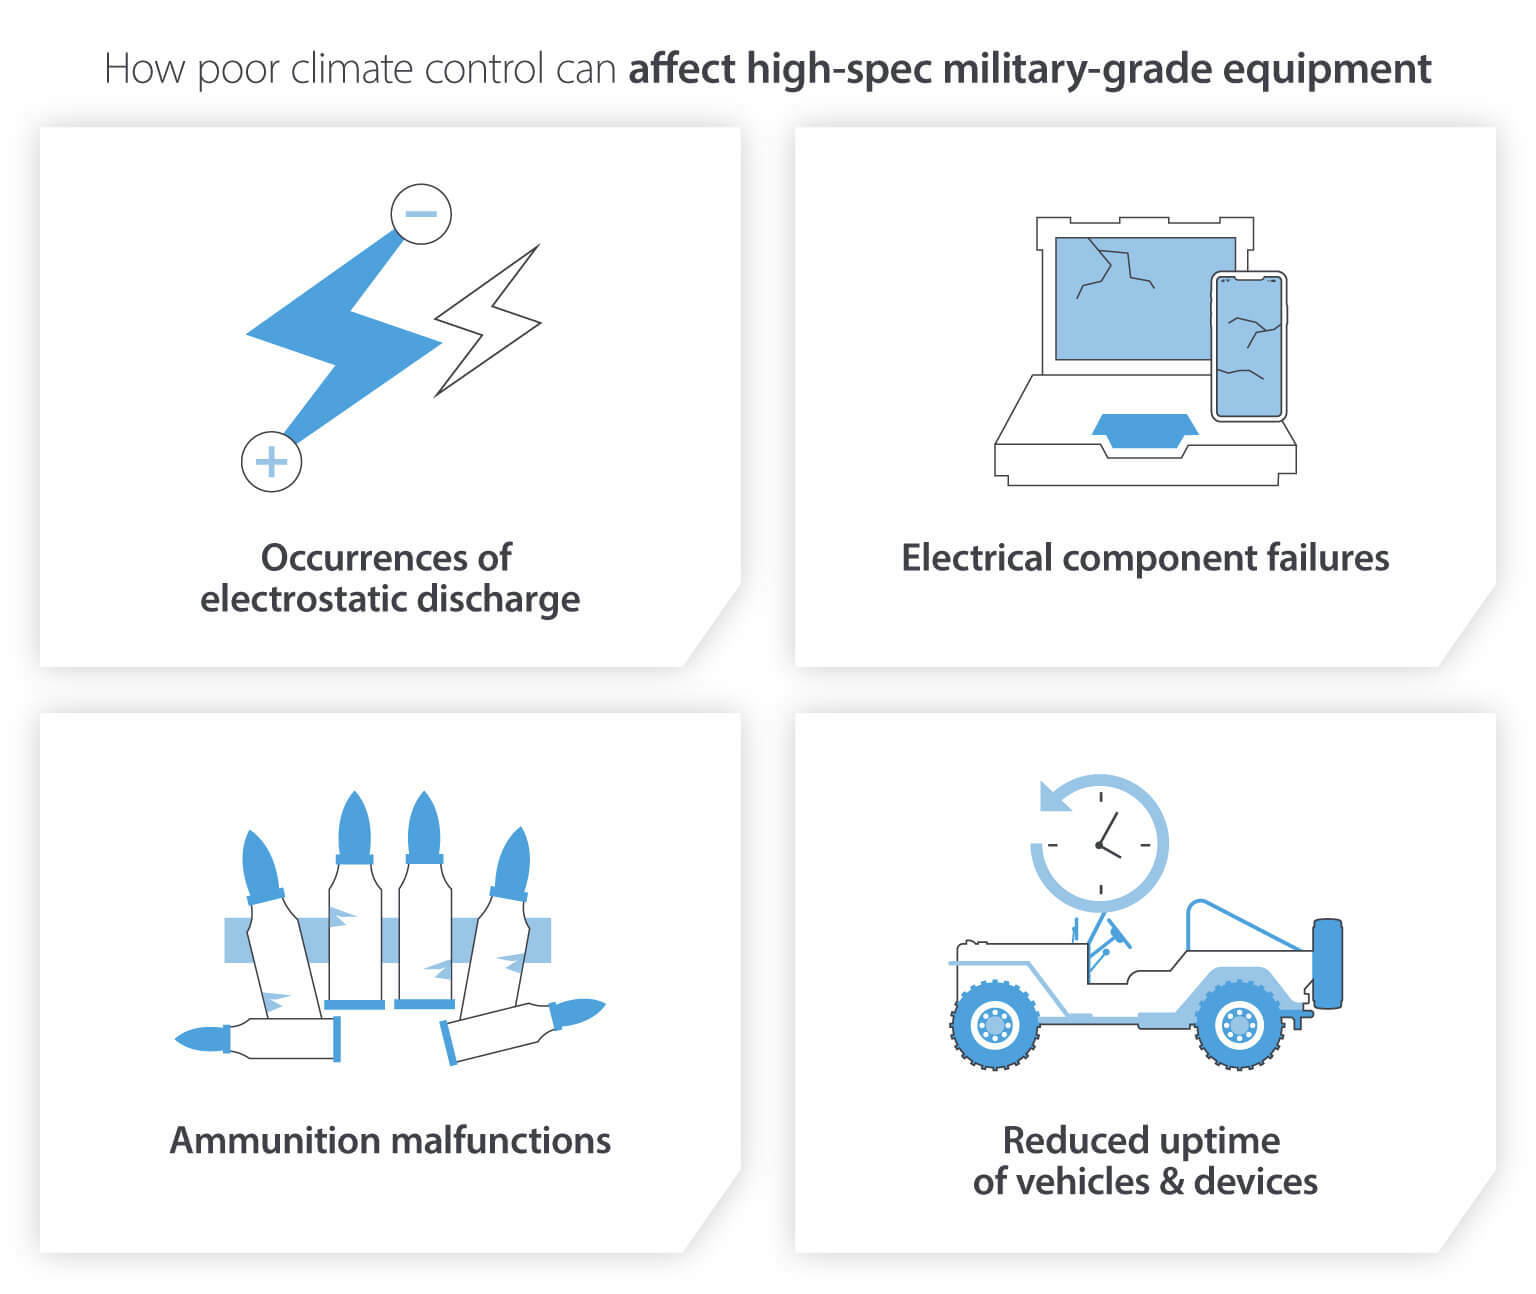 How poor climate control can affect high-spec military-grade equipment